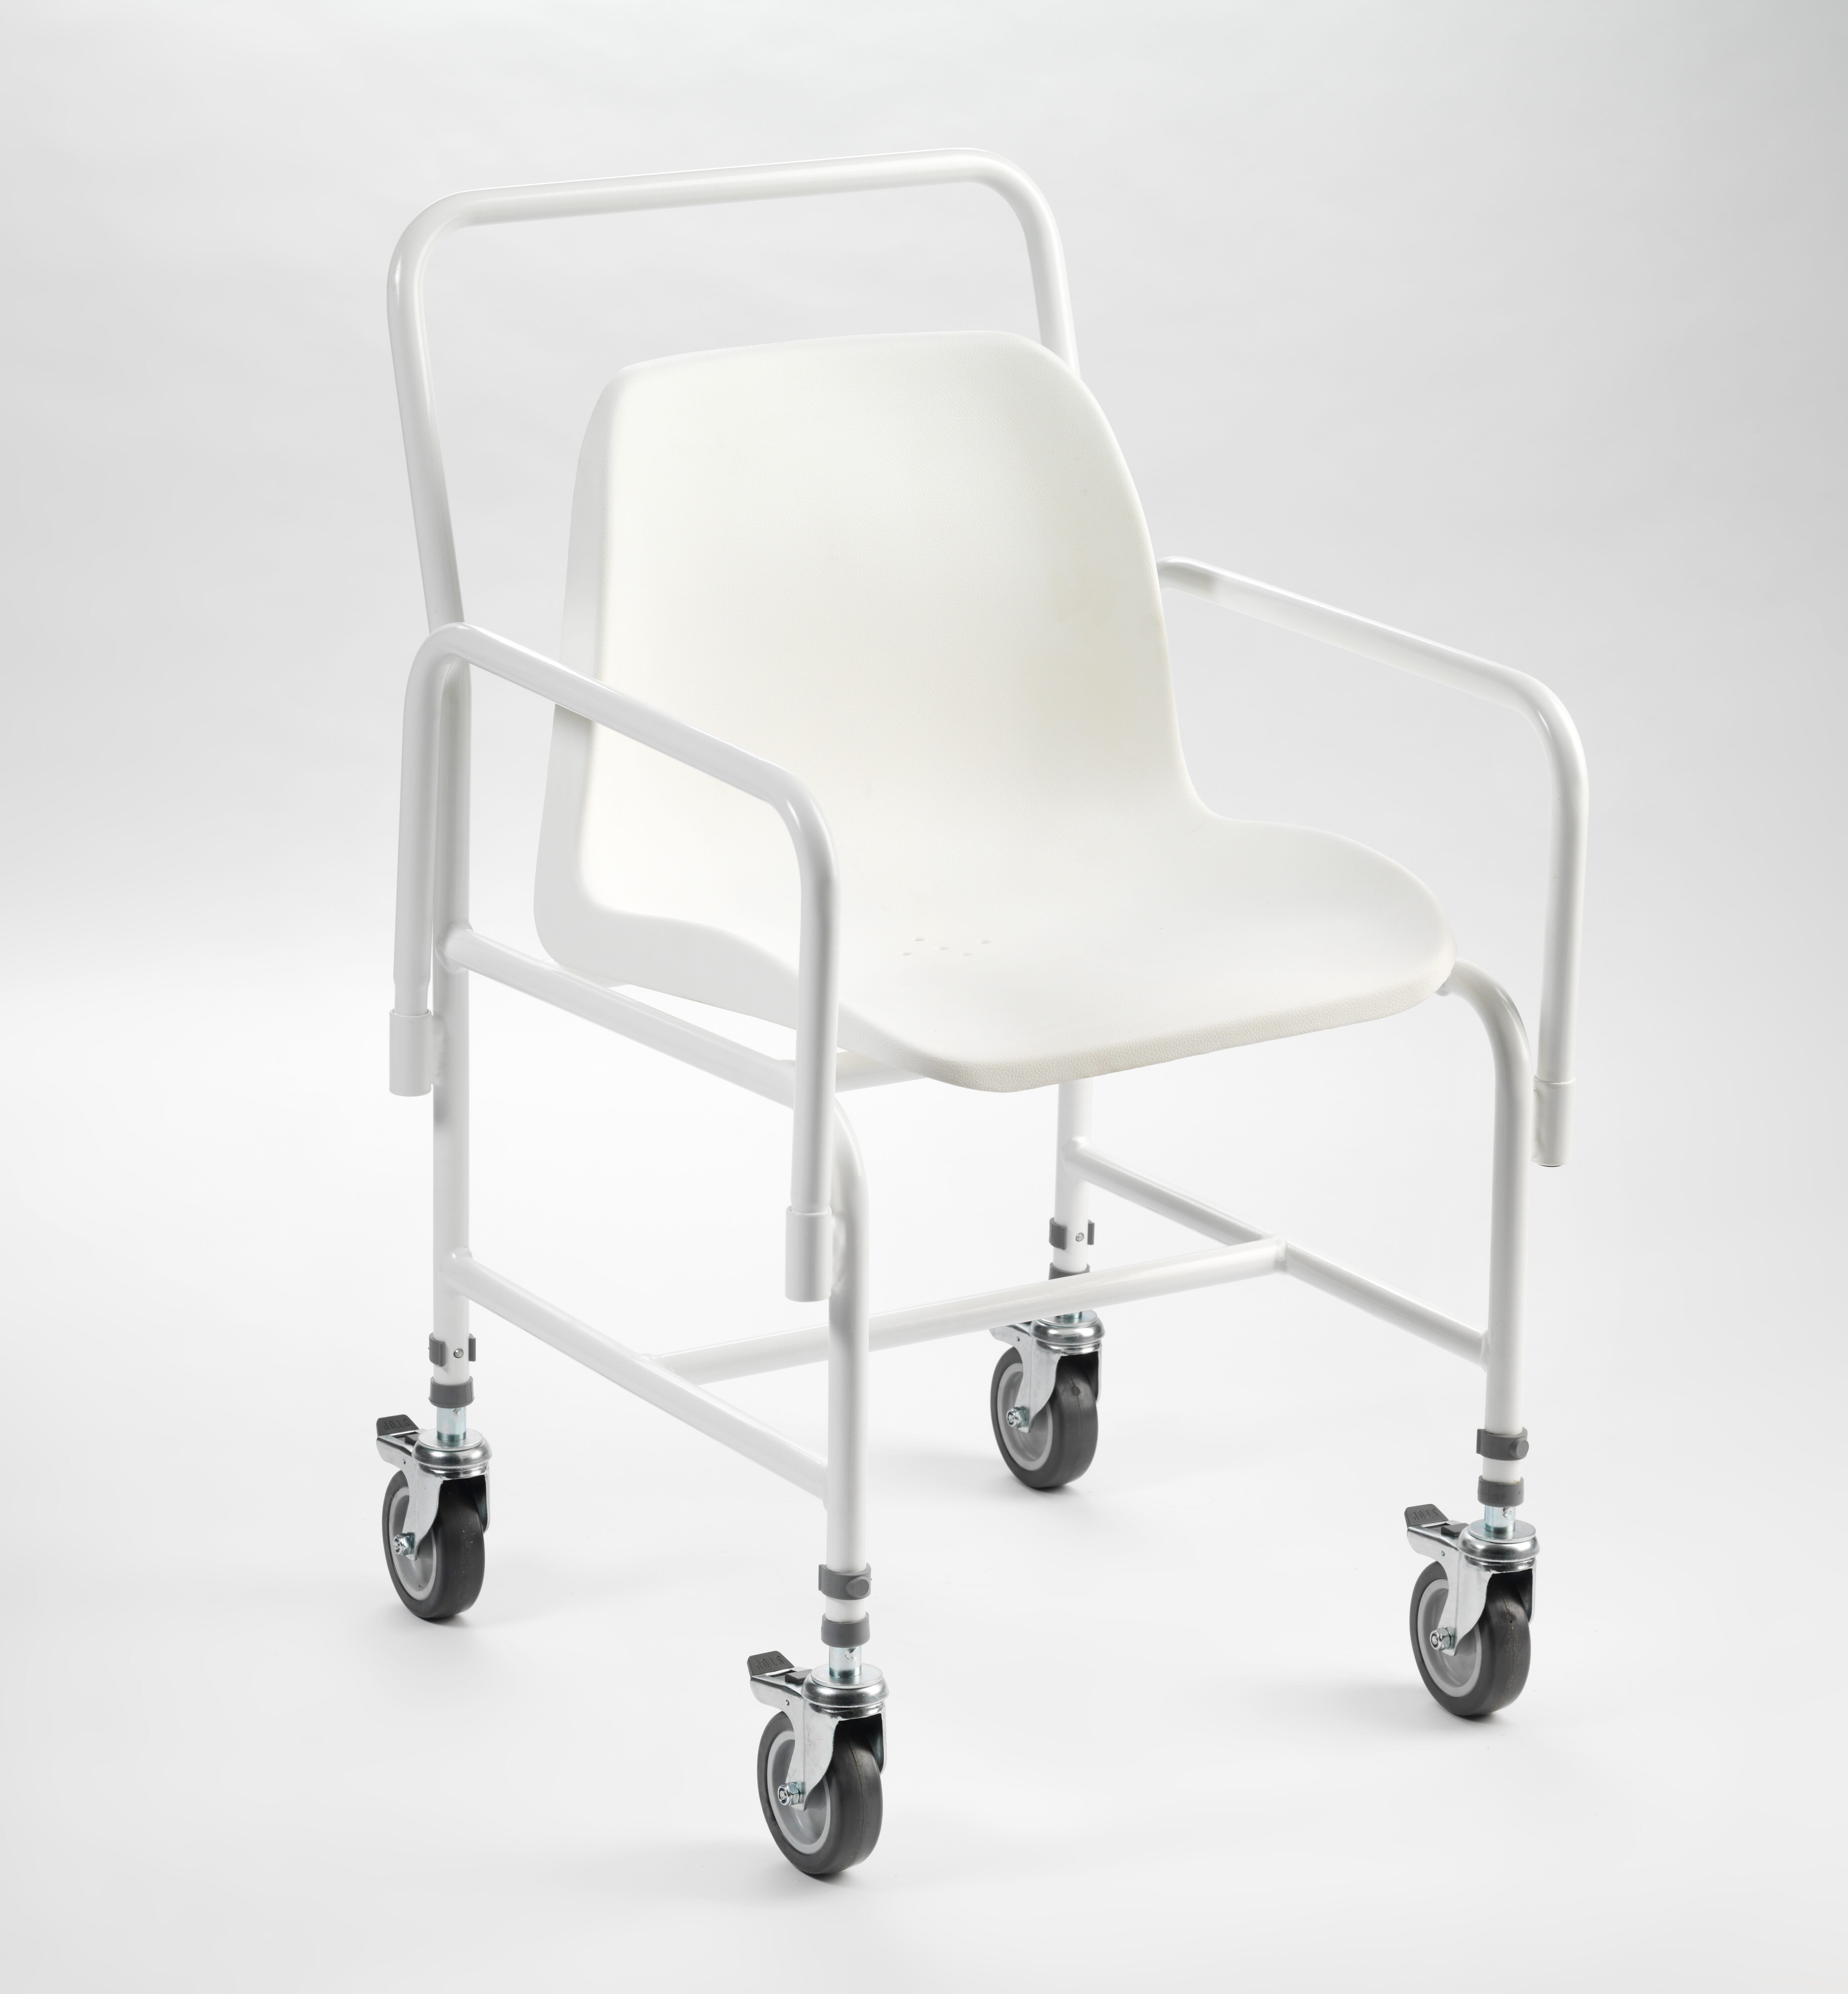 View Tilton Mobile Adjustable Height Shower Chair 4 Brake with Detachable Arms information